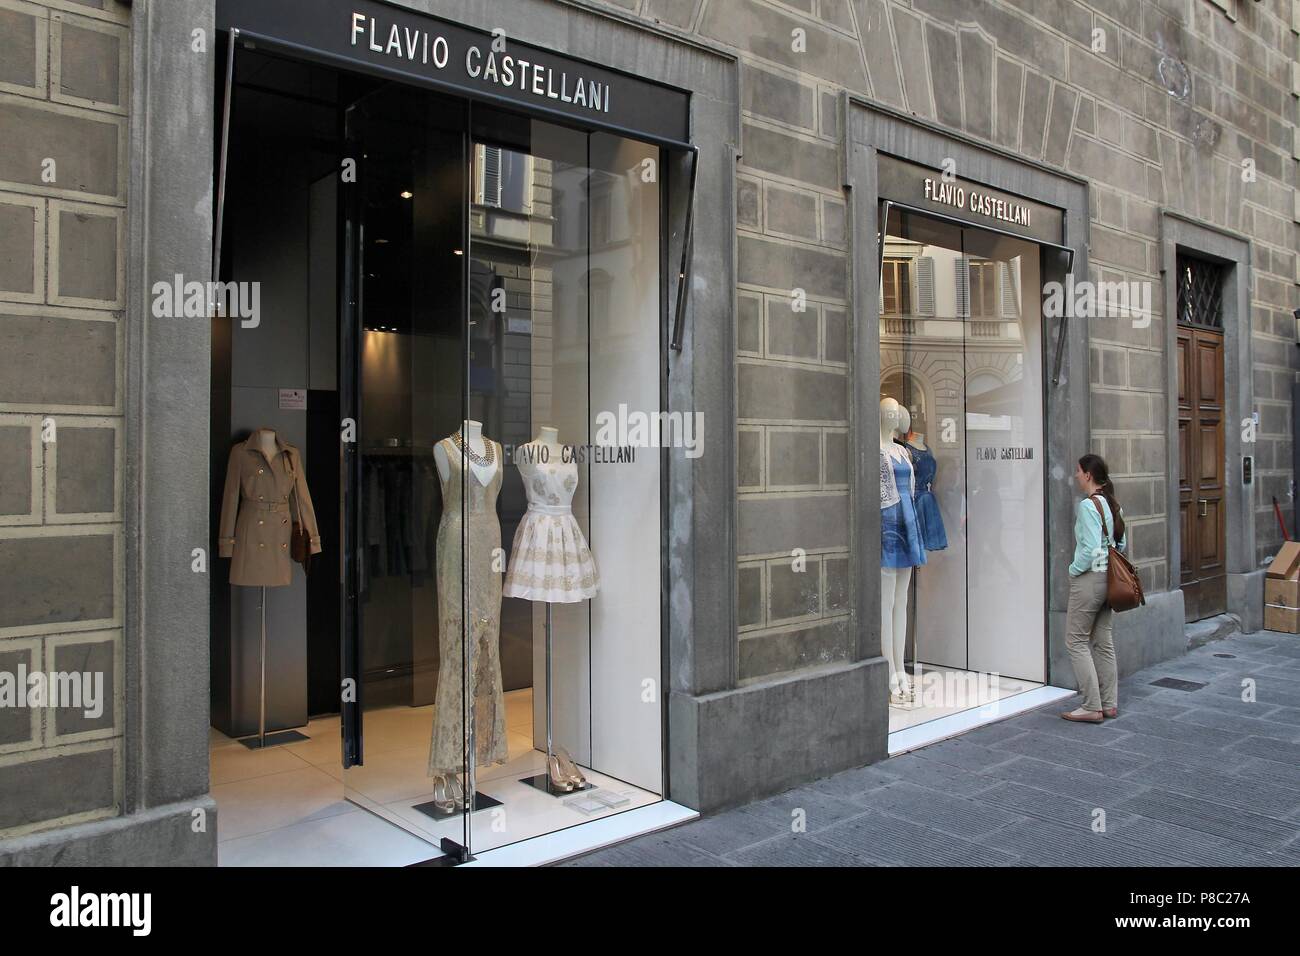 FLORENCE, ITALY - APRIL 30, 2015: Tourist visits Flavio Castellani fashion  store in Florence. The brand was founded in 1988 and is owned by Gioielli G  Stock Photo - Alamy